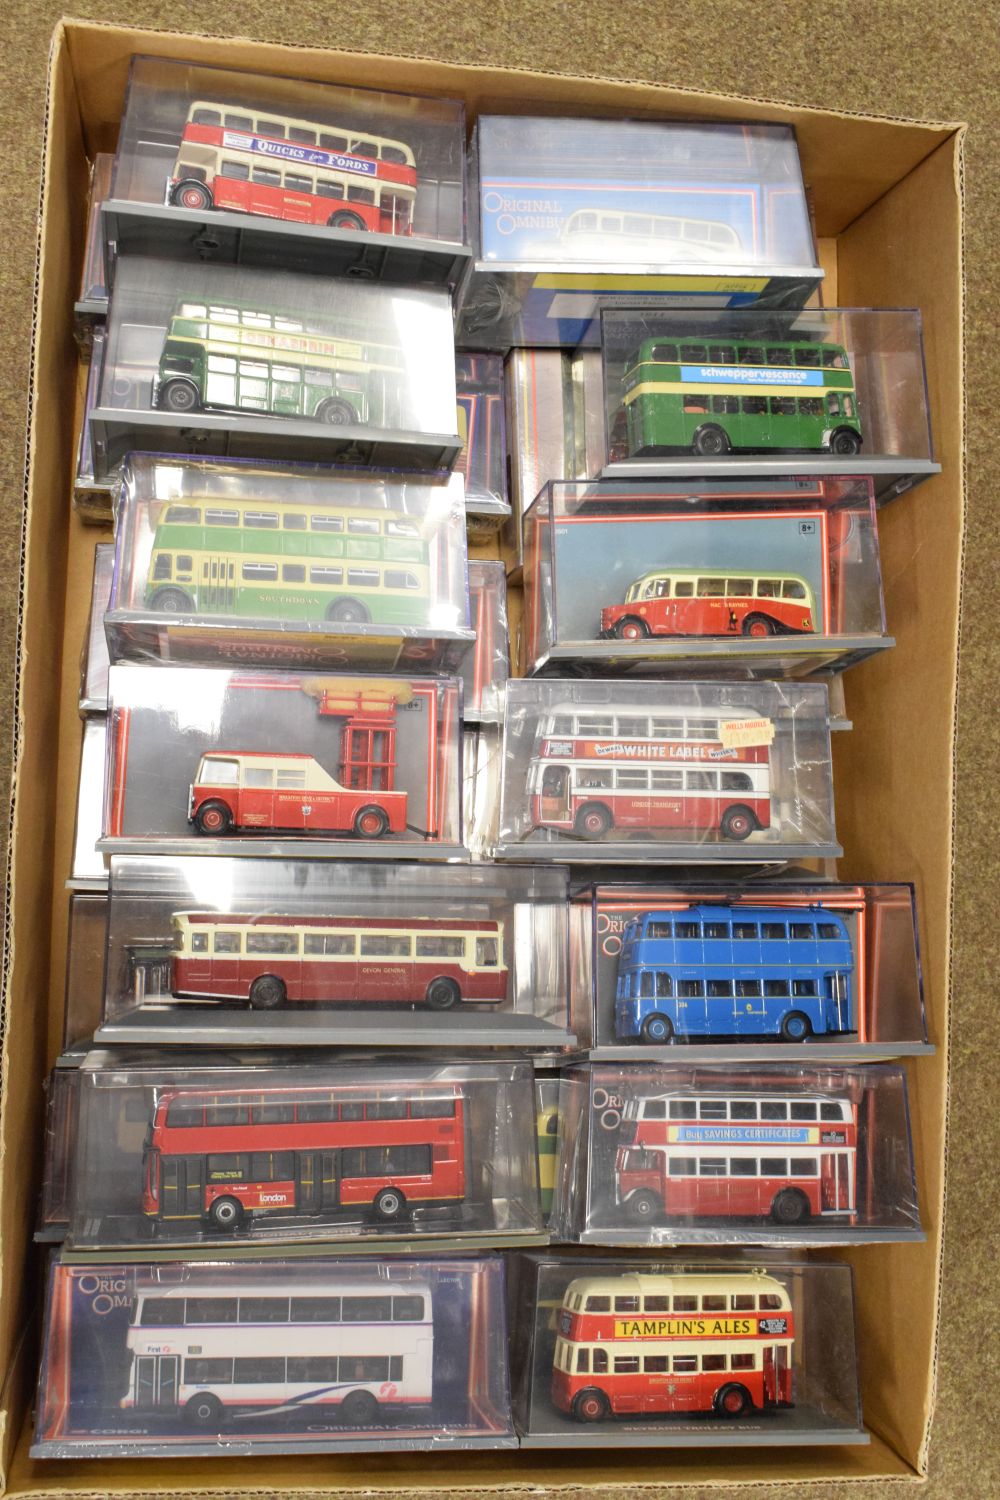 Quantity of Gilbow and Corgi 'The Original Omnibus Company' die-cast model buses and coaches, all - Image 2 of 8